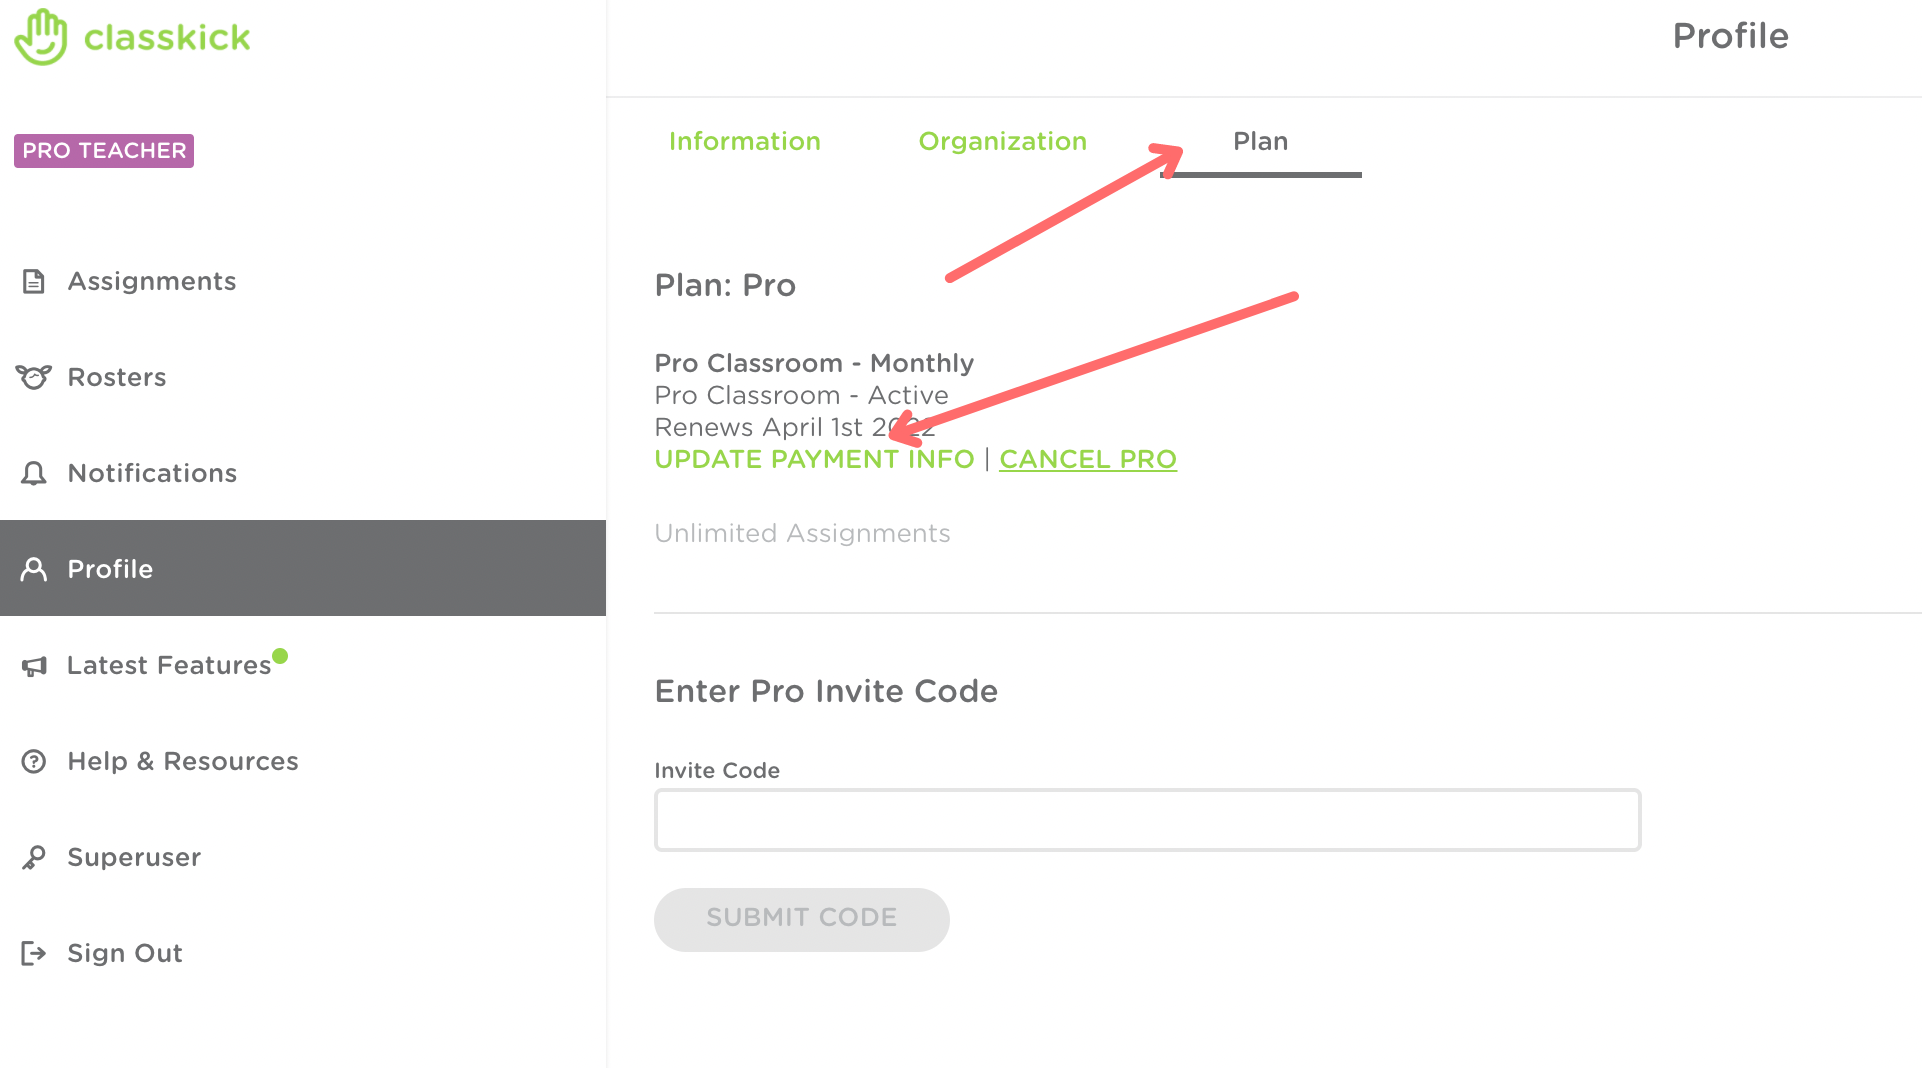 The plan tab under the teacher’s profile. A red arrow points to Plan at the top of the page. Another red arrow points to updated payment info.